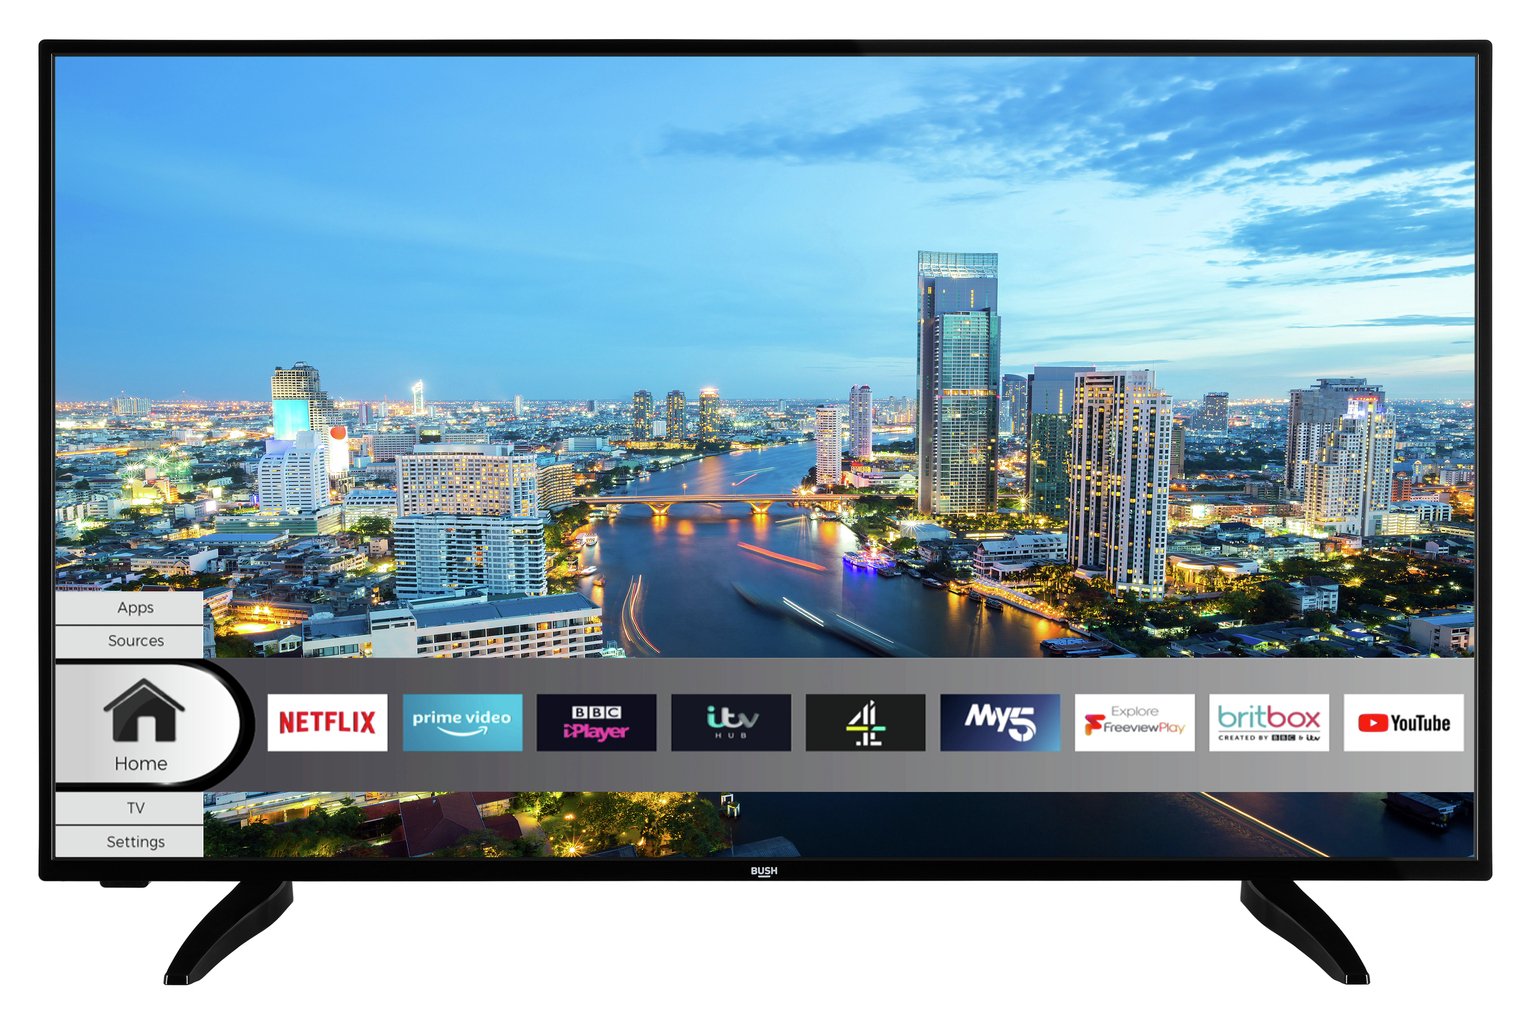 Bush 50 Inch Smart 4K Ultra HD DLED TV with HDR Review